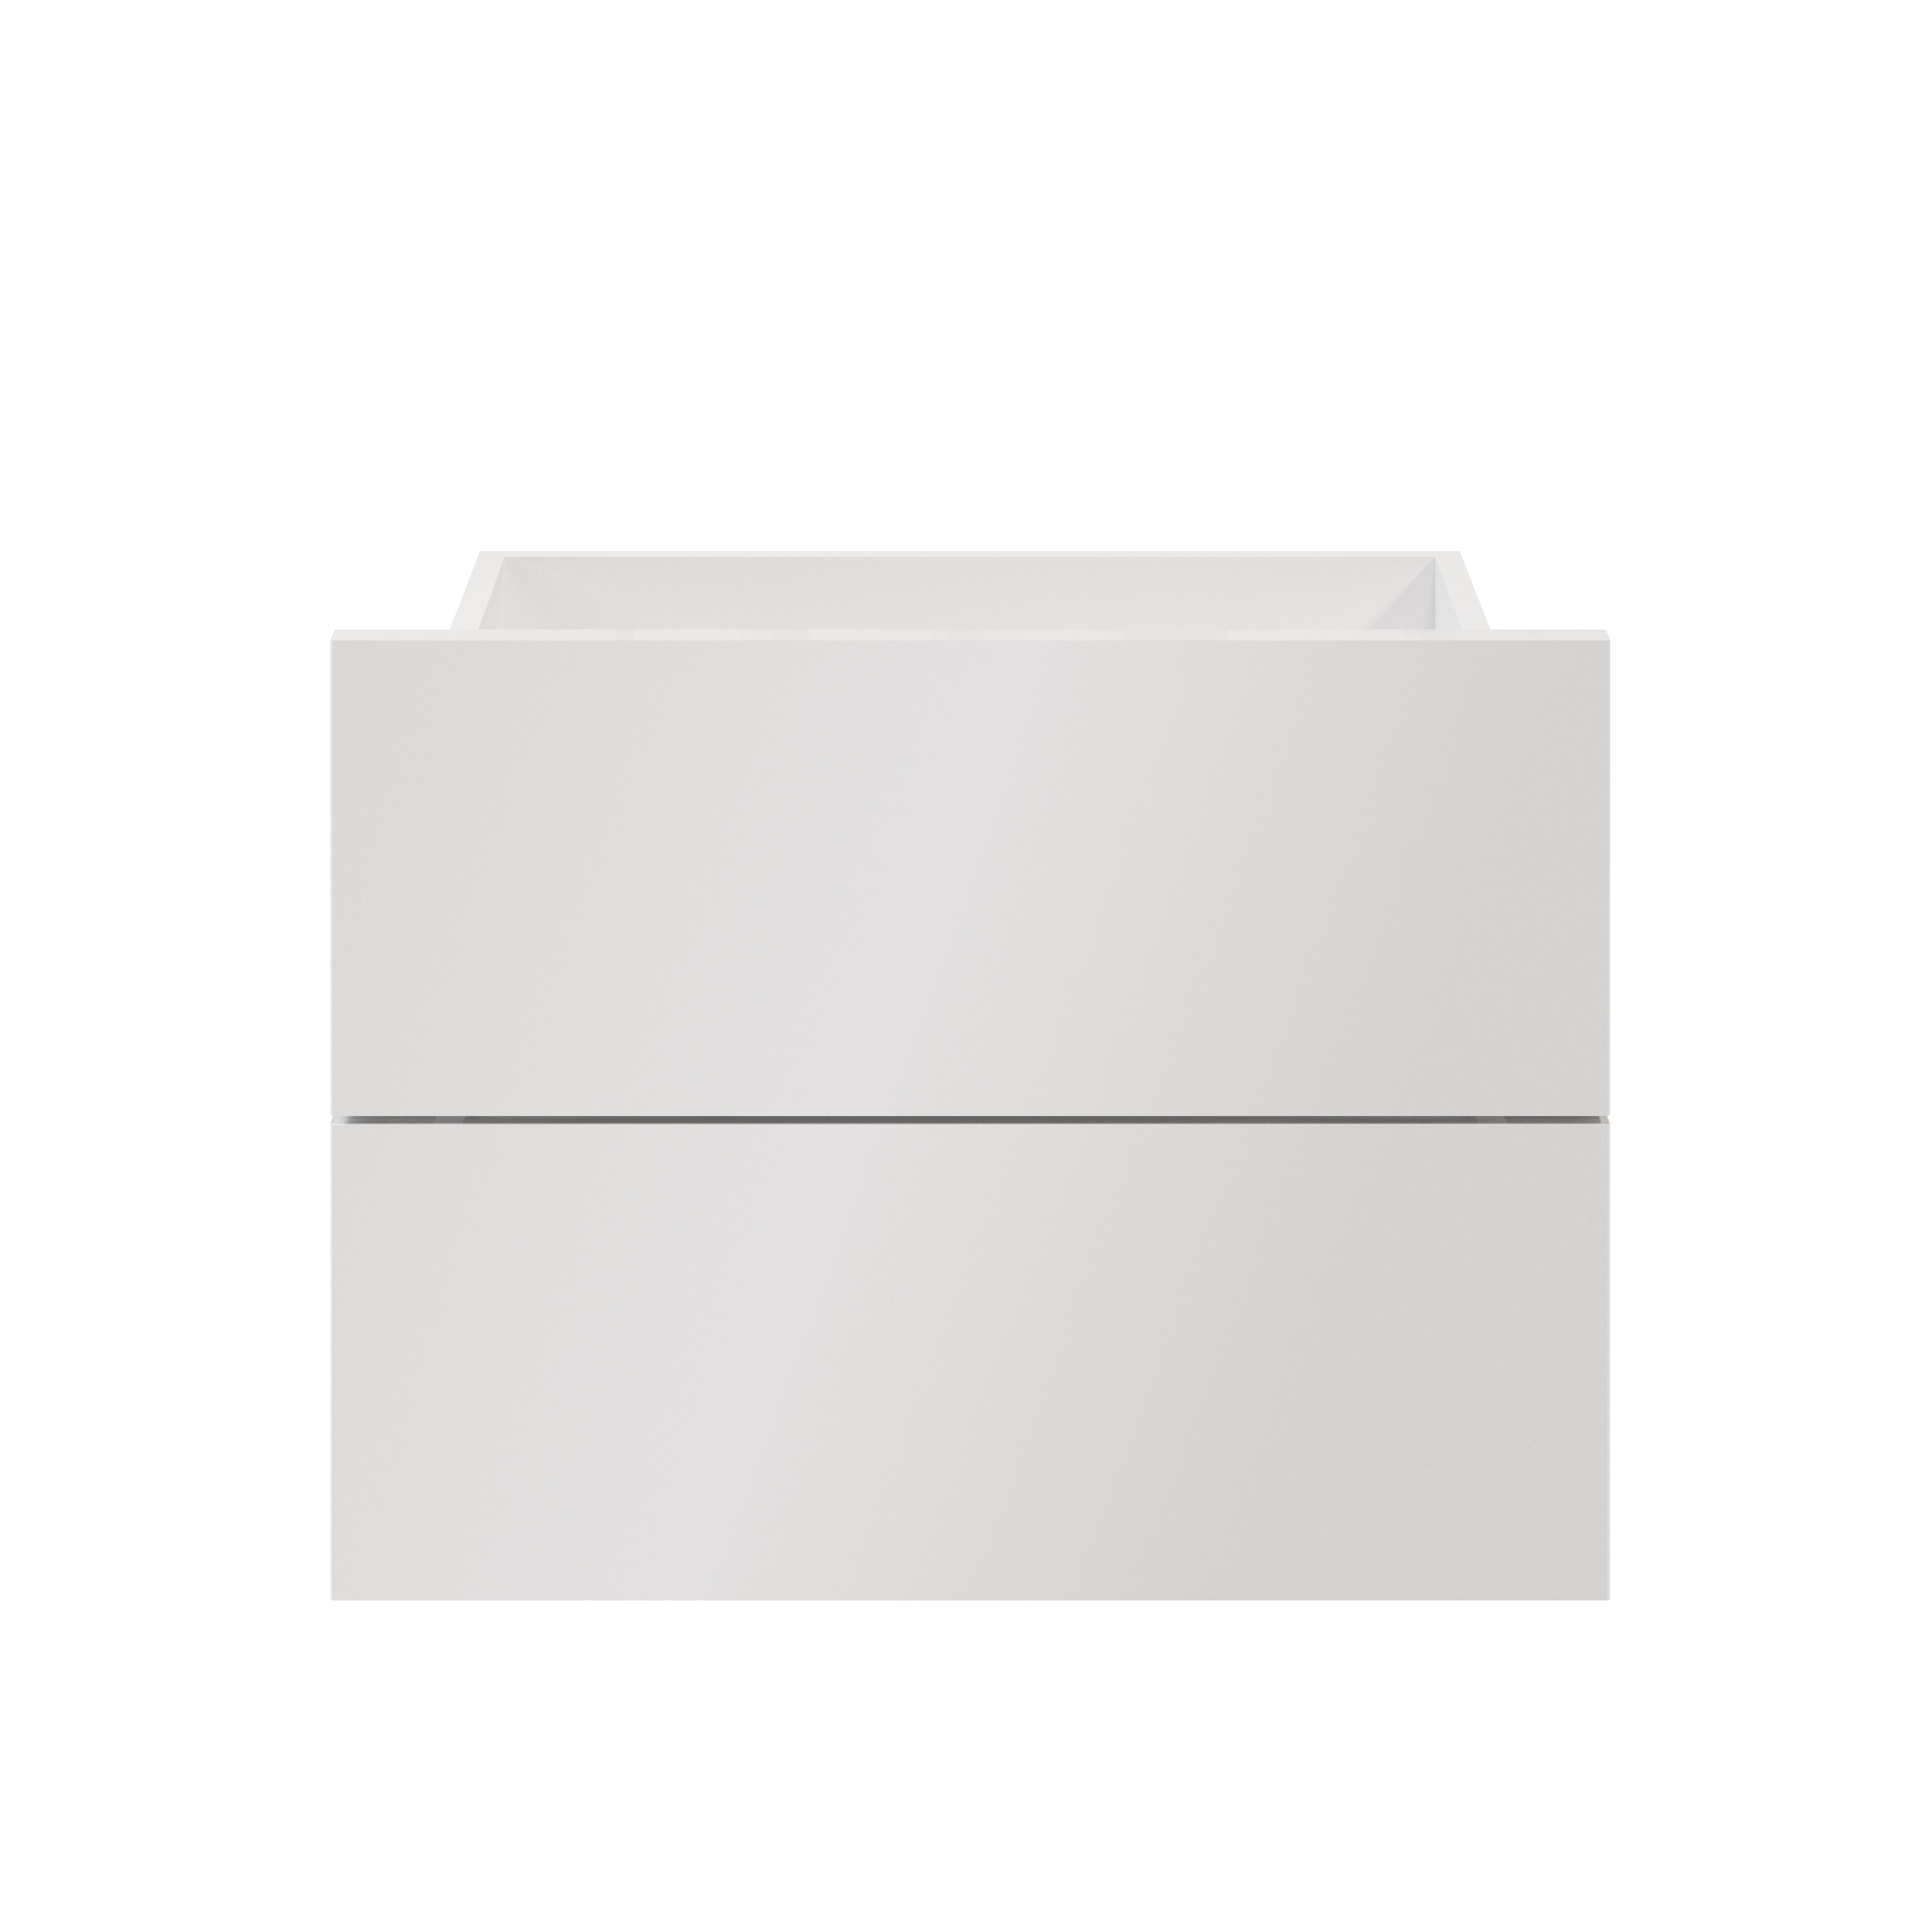 GoodHome Atomia Gloss white Slab External Drawer (H)184.5mm (W)497mm (D)300mm, Set of 2